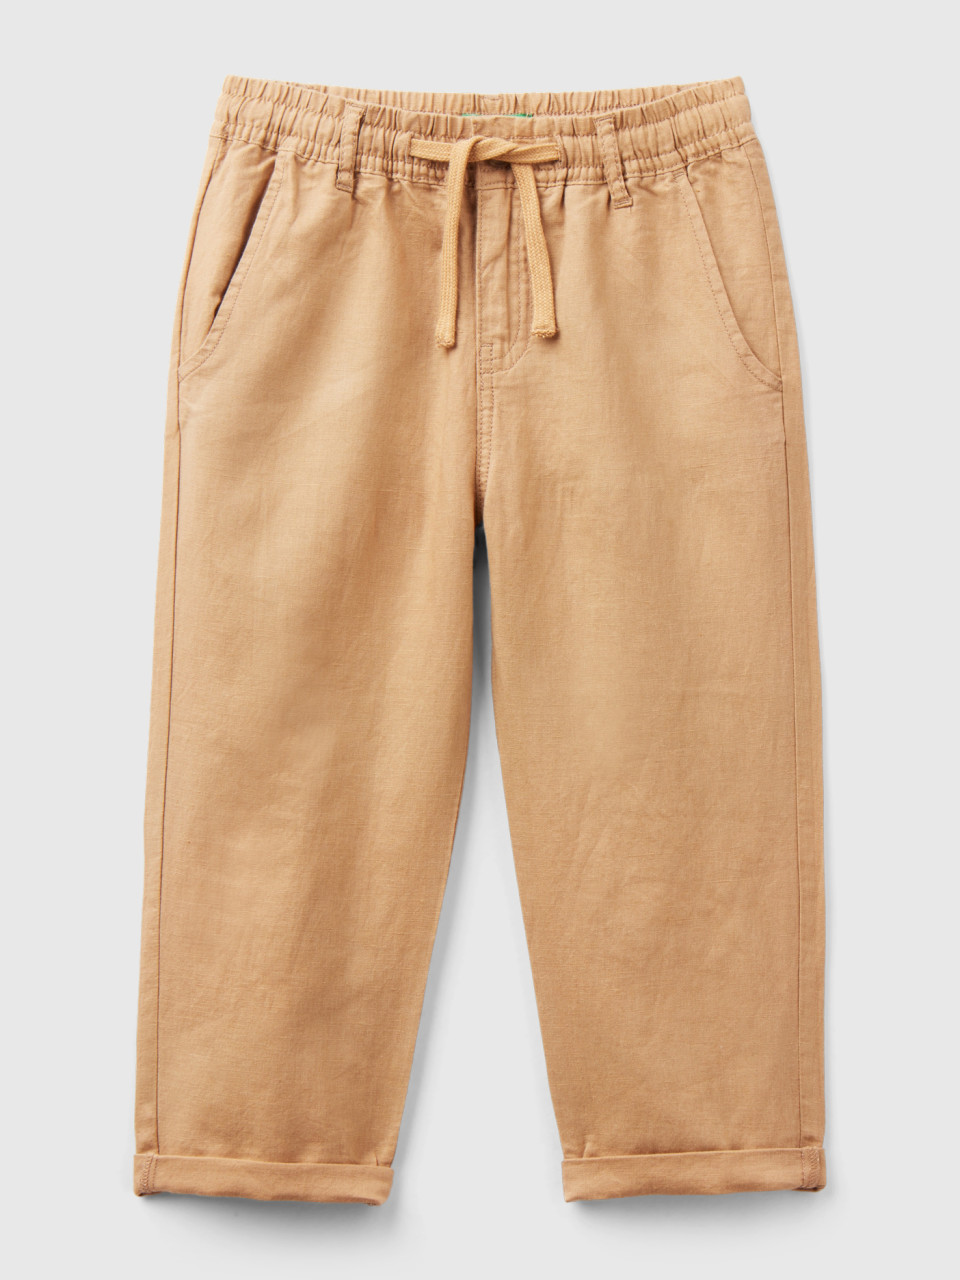 Benetton, Trousers In Linen Blend With Drawstring, Camel, Kids